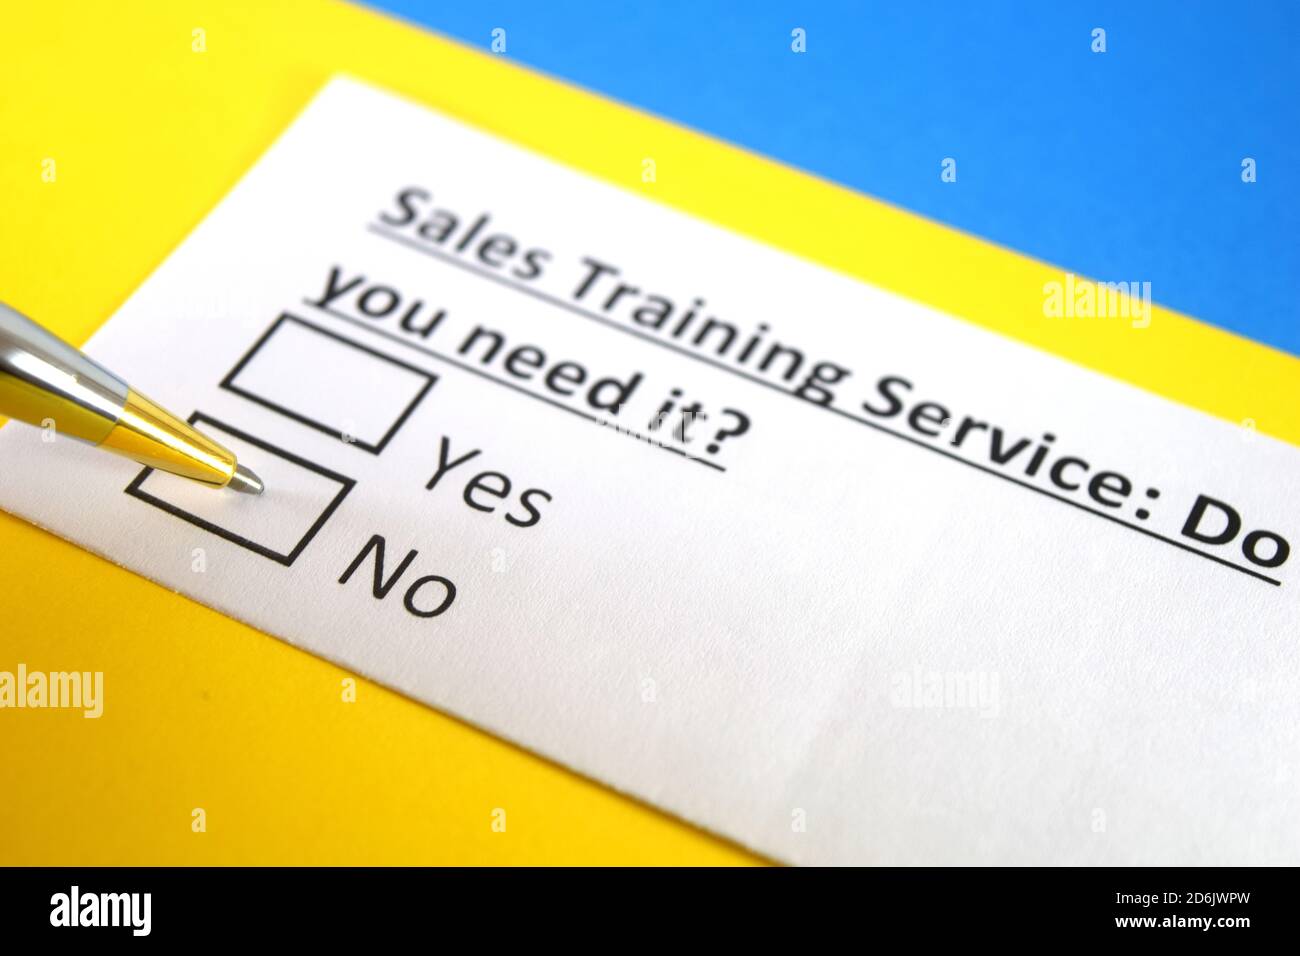 One person is answering question about sales training service. Stock Photo